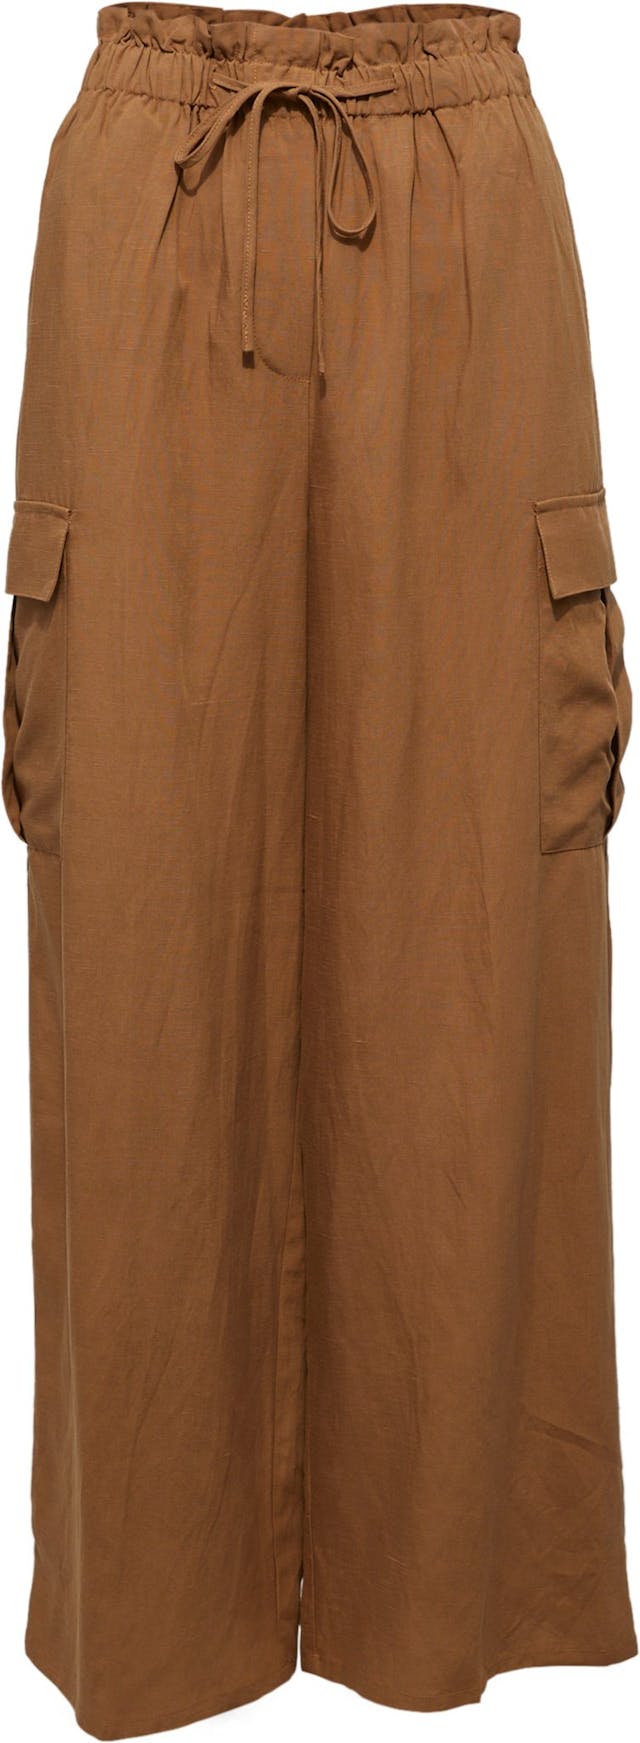 Product image for The Emma Loose Cargo Pant - Women's